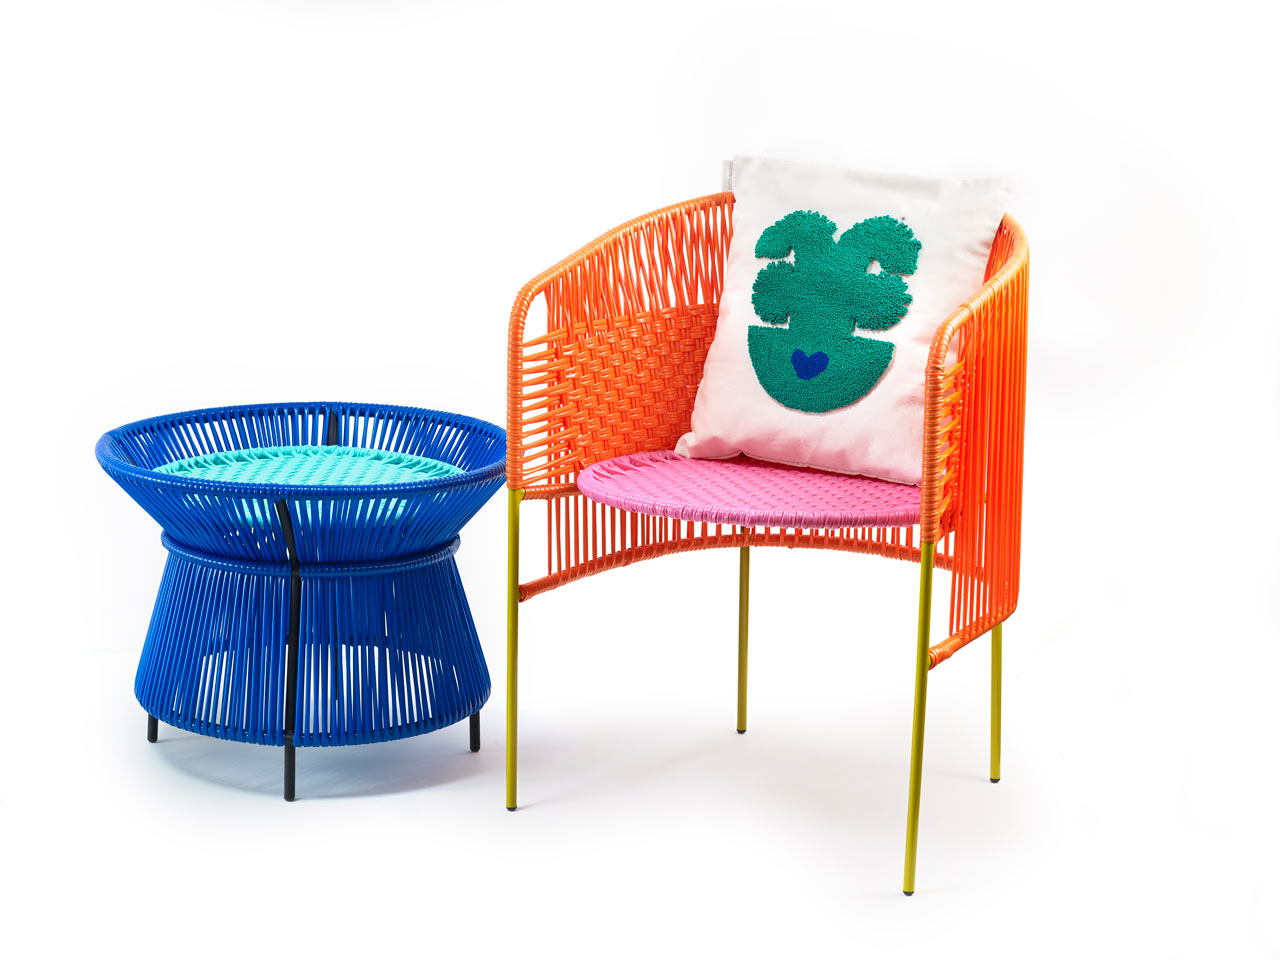 ames Launches CARIBE, a Colorful Outdoor Collection Made of Recycled Plastic